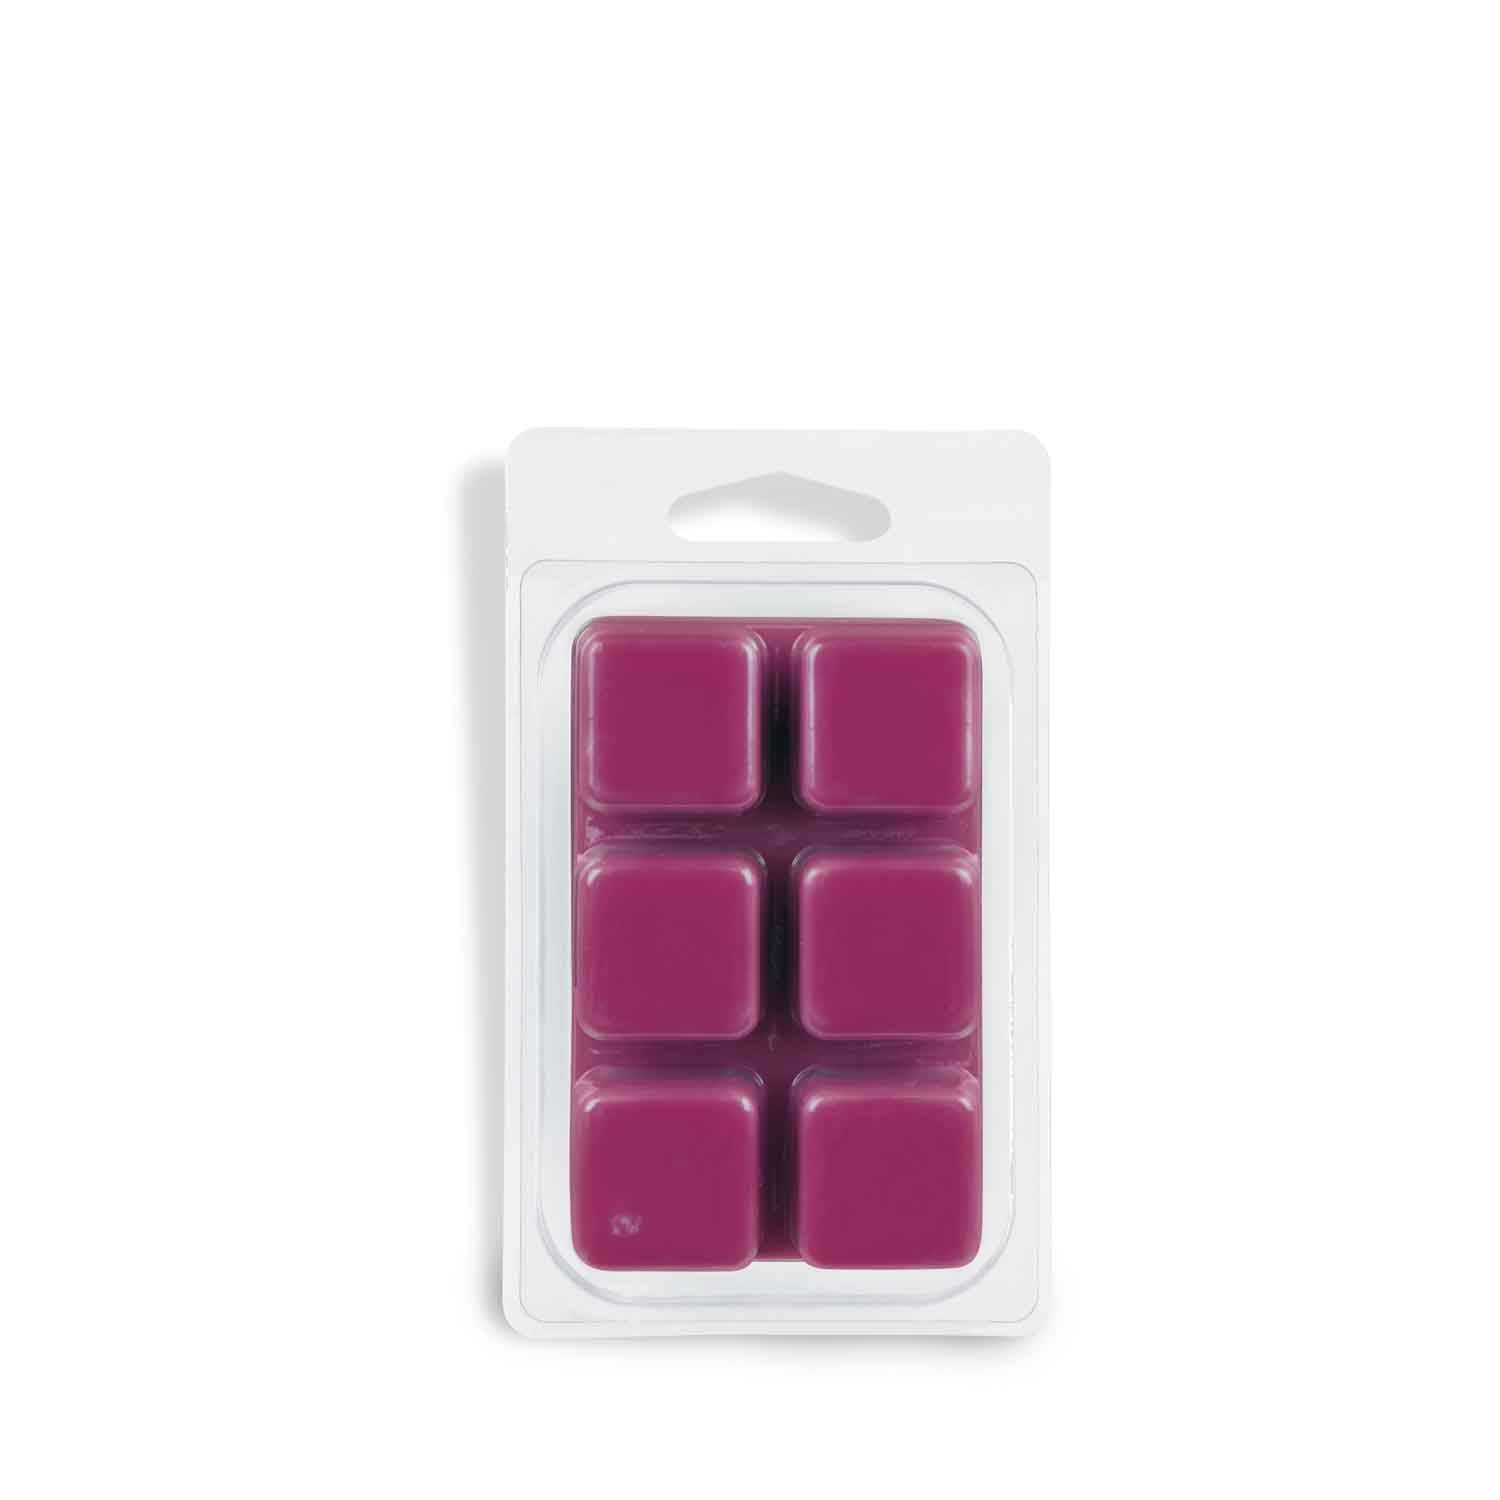 A pack of Fruit Smoothie Scented Tuscany Candle® wax melts on a white background.